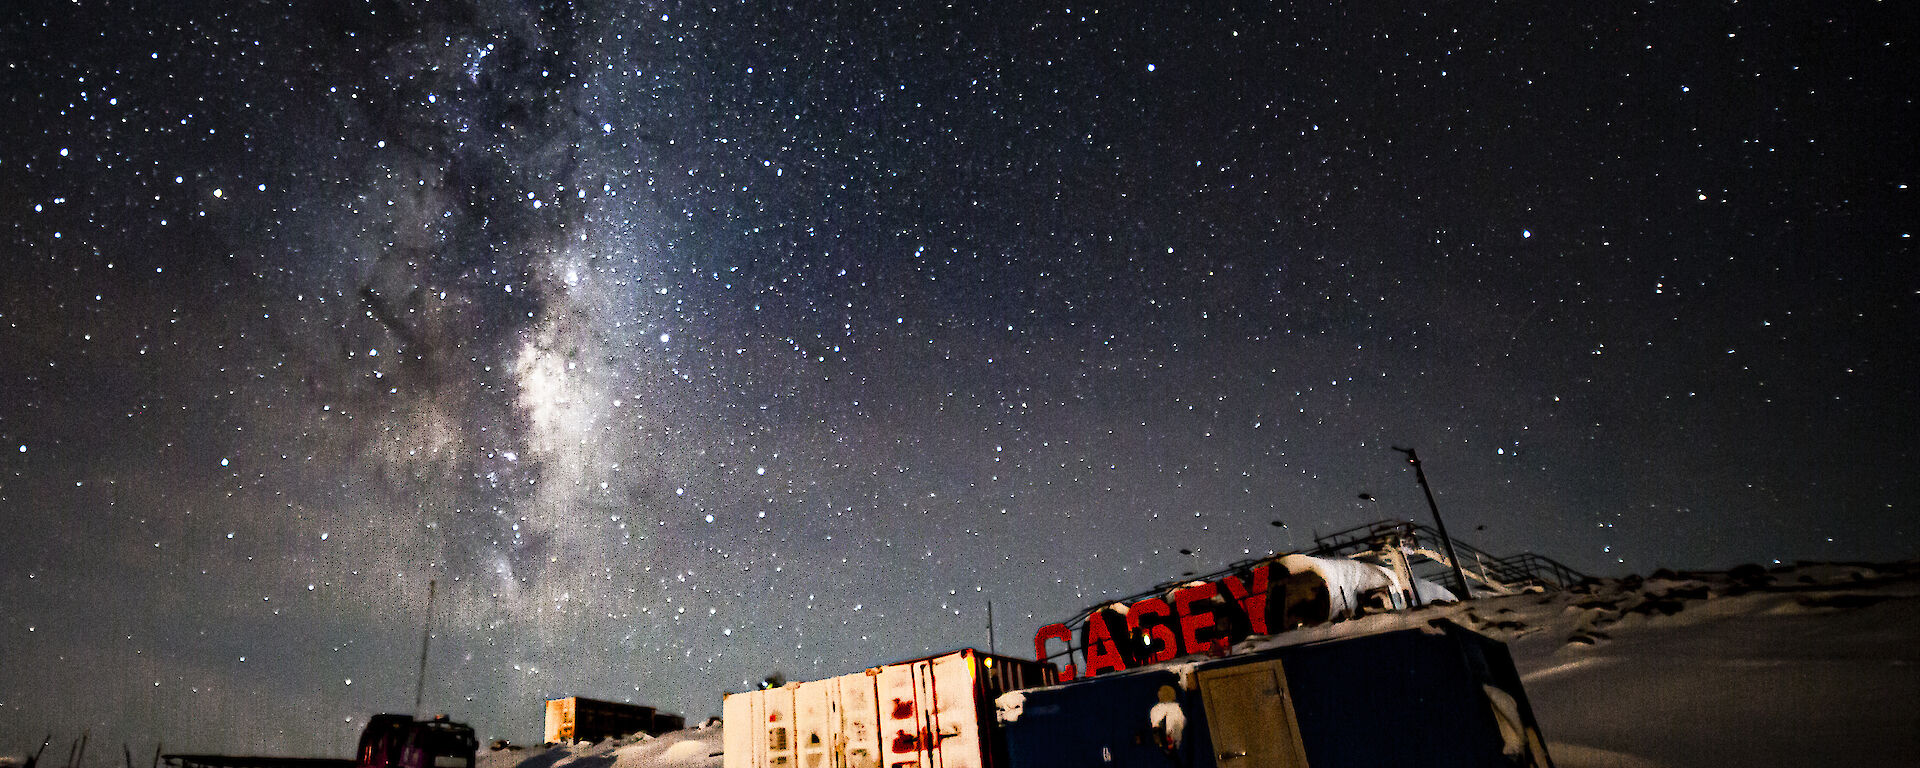 A night scene in a location with shipping containers. Large, red letters spelling "CASEY" are erected on a rise behind them. The night sky is thickly- and brightly-starred and the pale glow of the Milky Way can be seen extending from the horizon